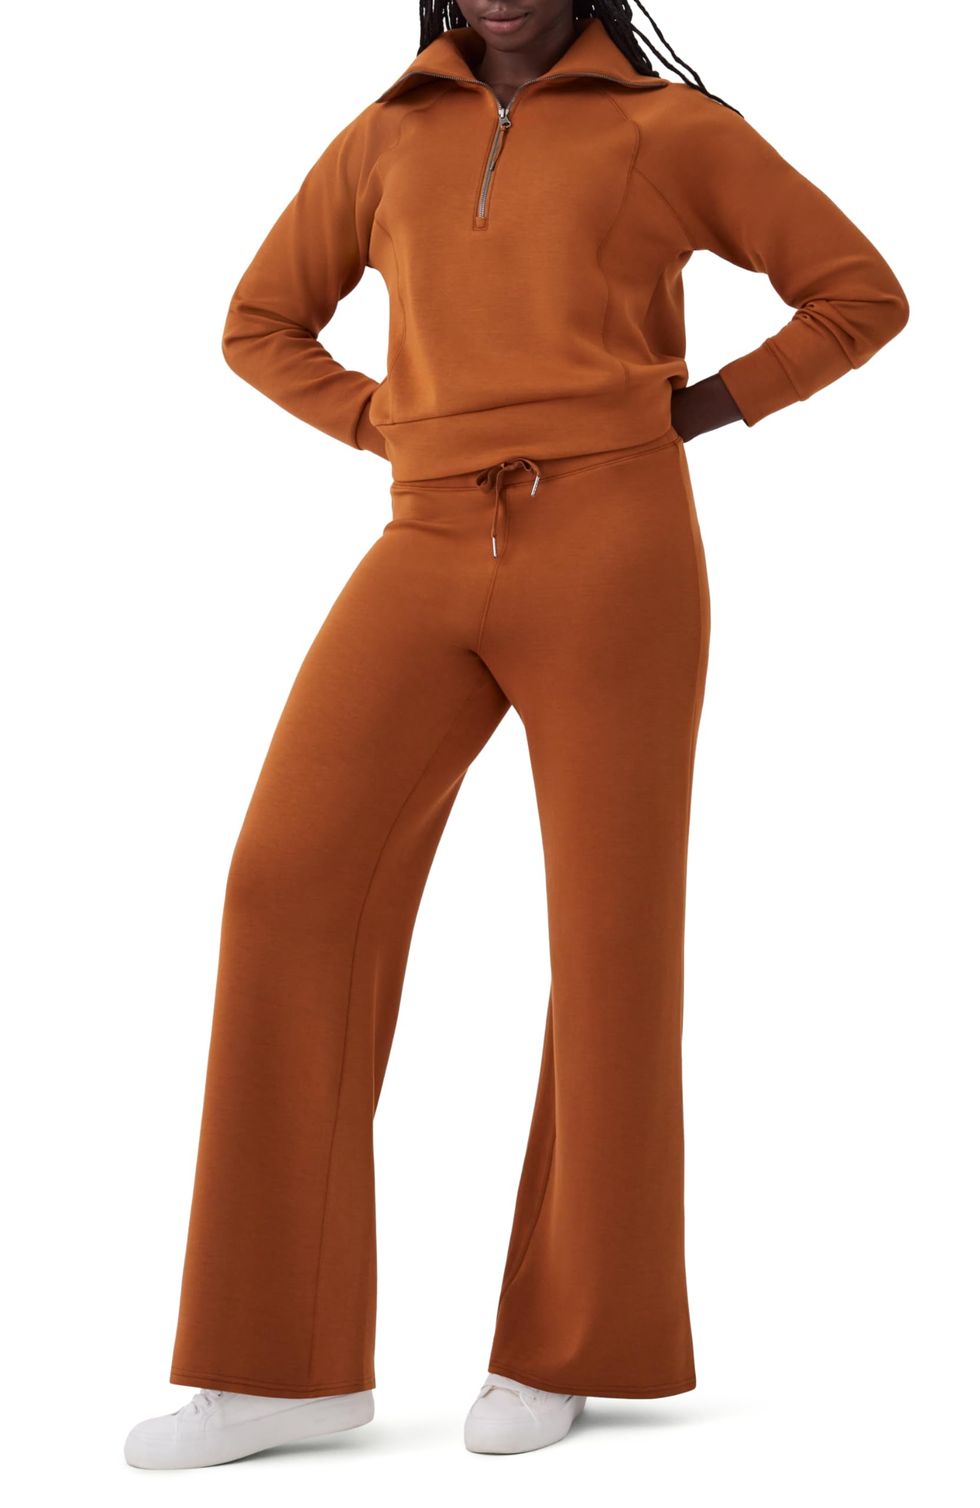 Spanx Summer Warehouse Sale 2023 Has 70% Off Oprah-Loved Pants & More